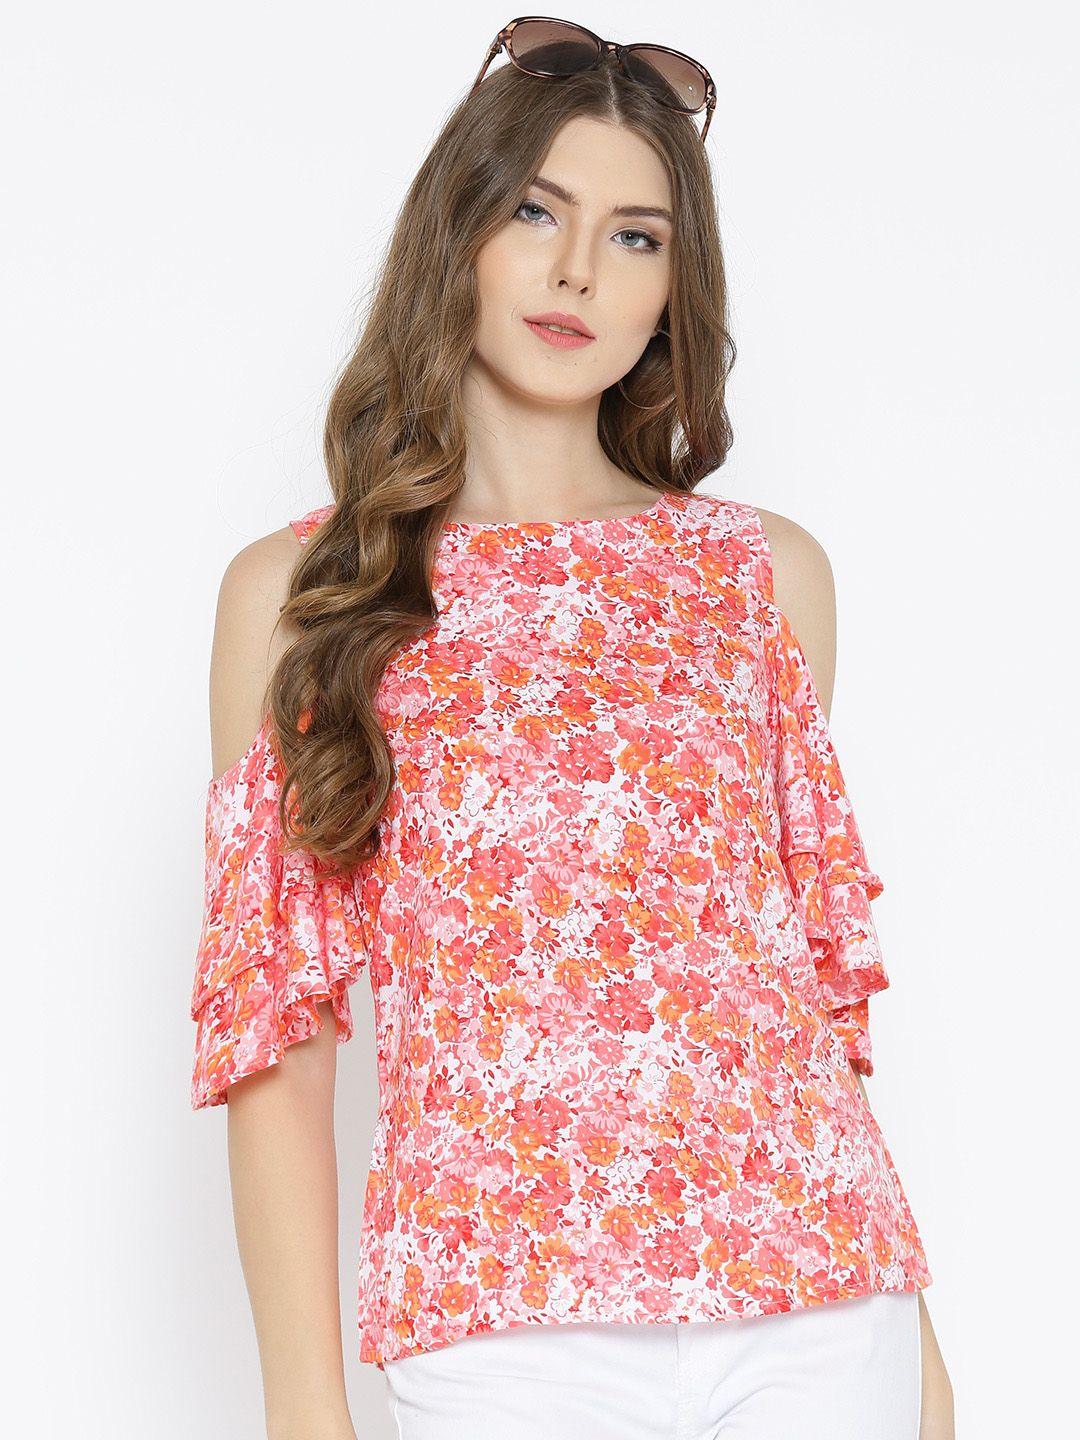 sera women off-white & pink floral printed cold-shoulder pure cotton top